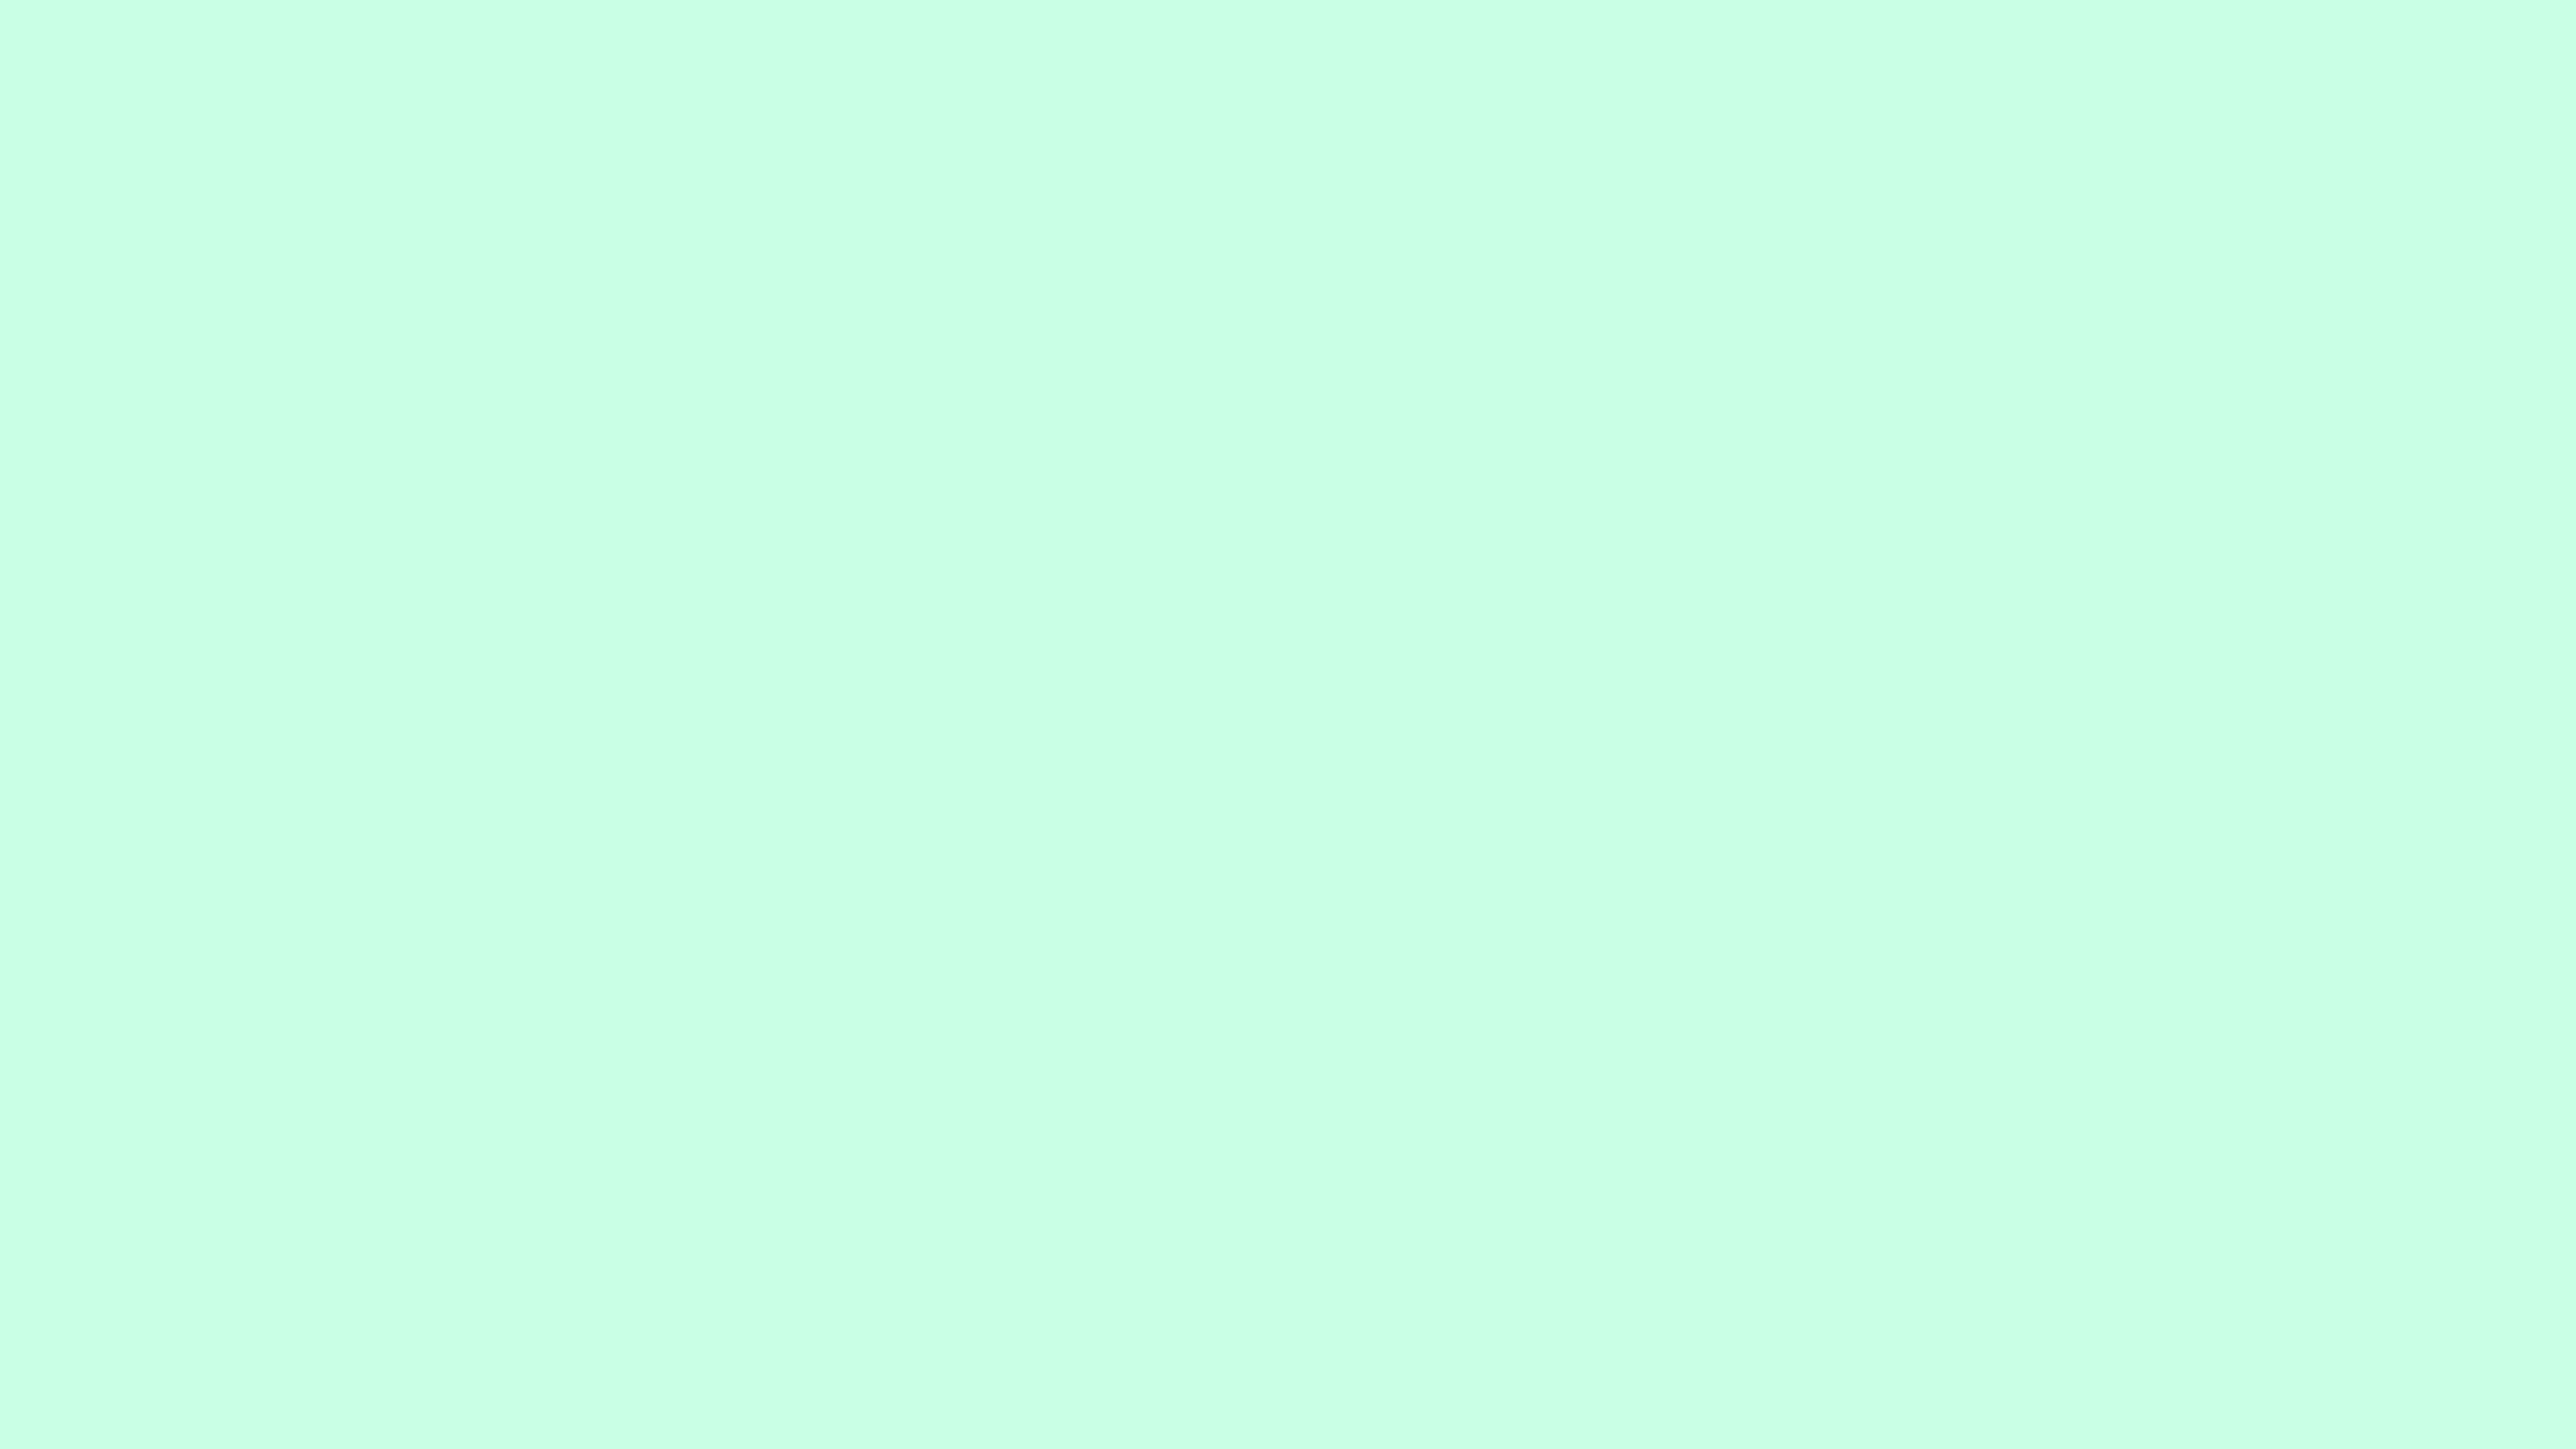 4096x2304 Aero Blue Solid Color Background